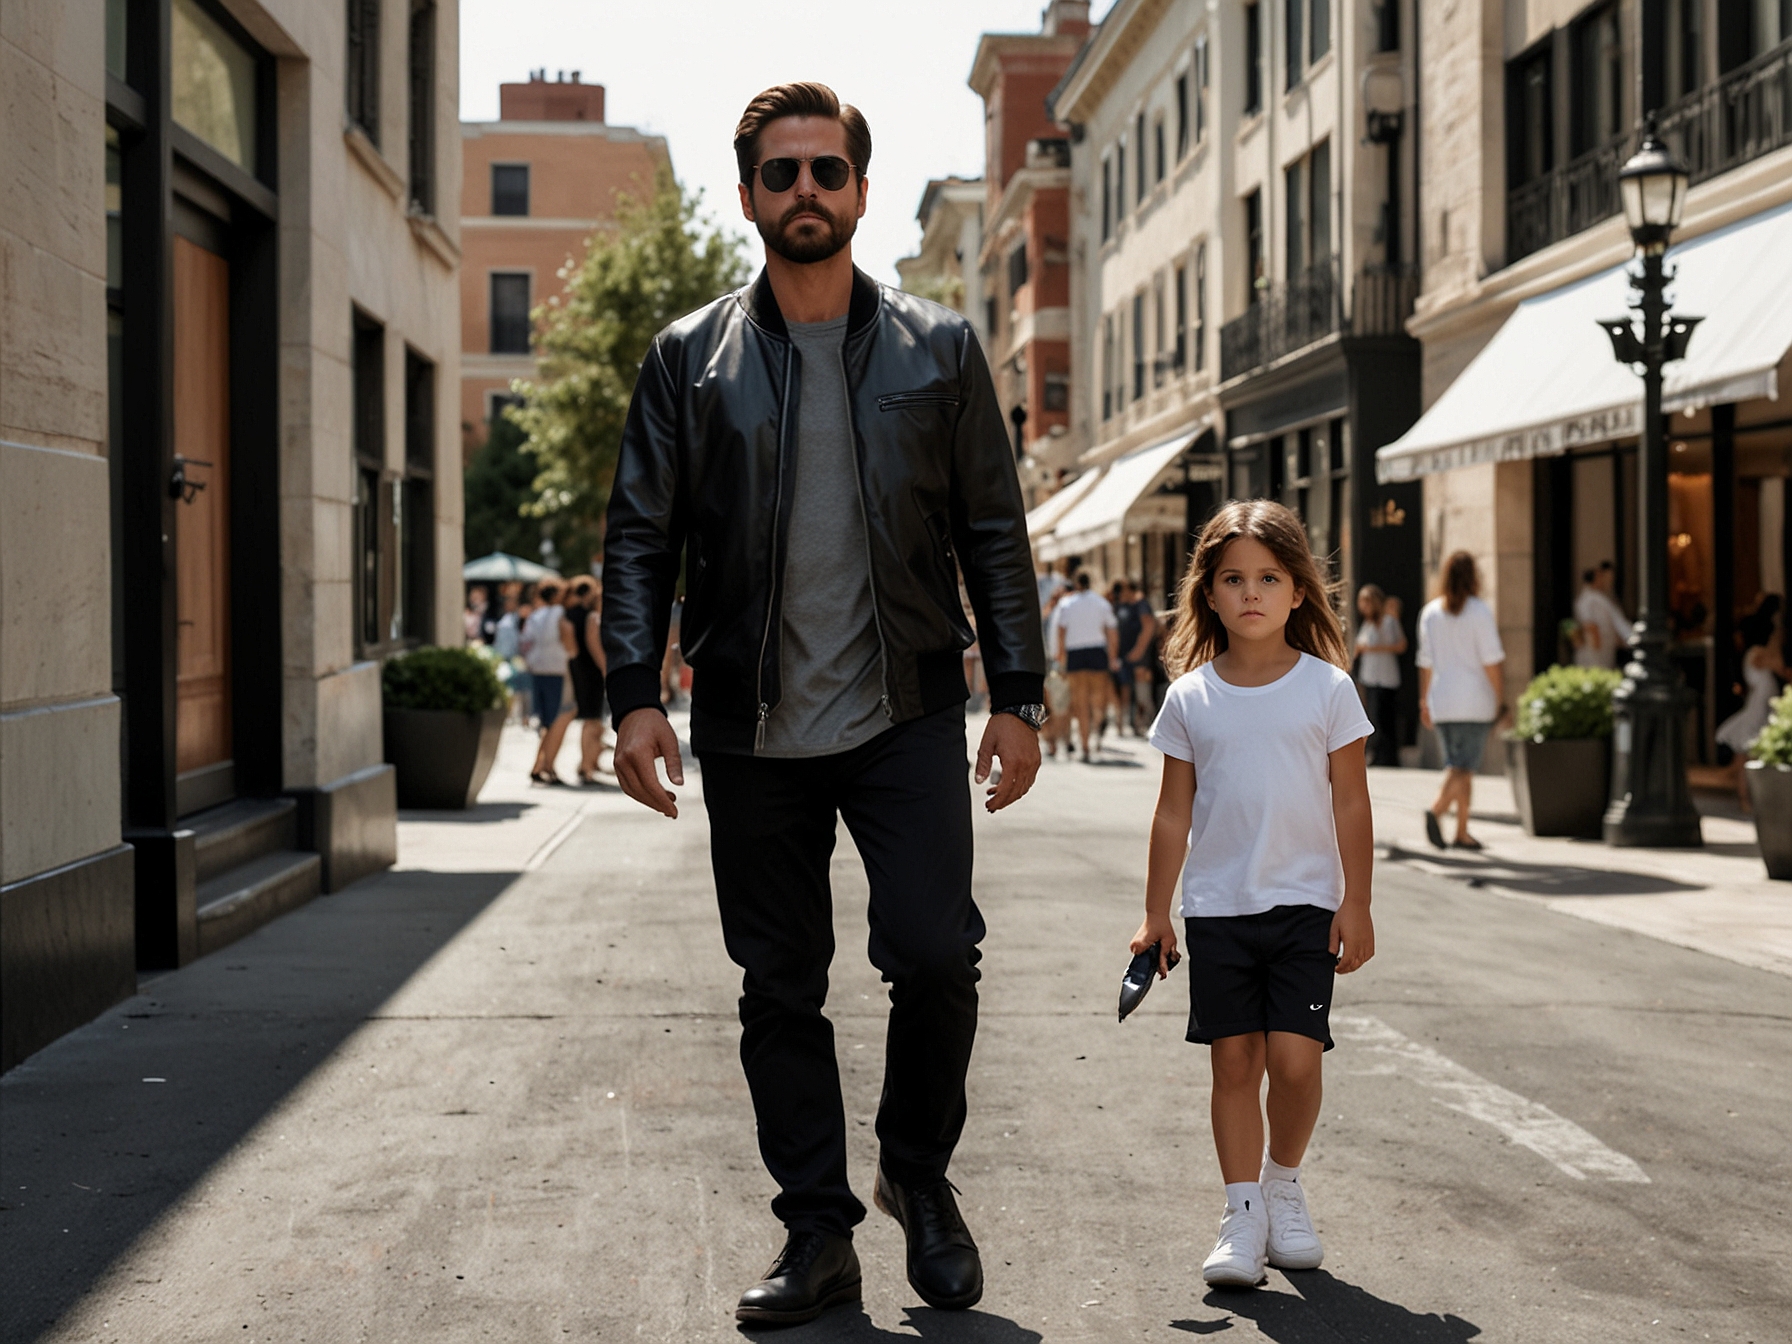 Scott Disick, father to Kourtney’s three children, receives no mention in her Father’s Day post, causing a stir among followers who regard his contributions as significant.